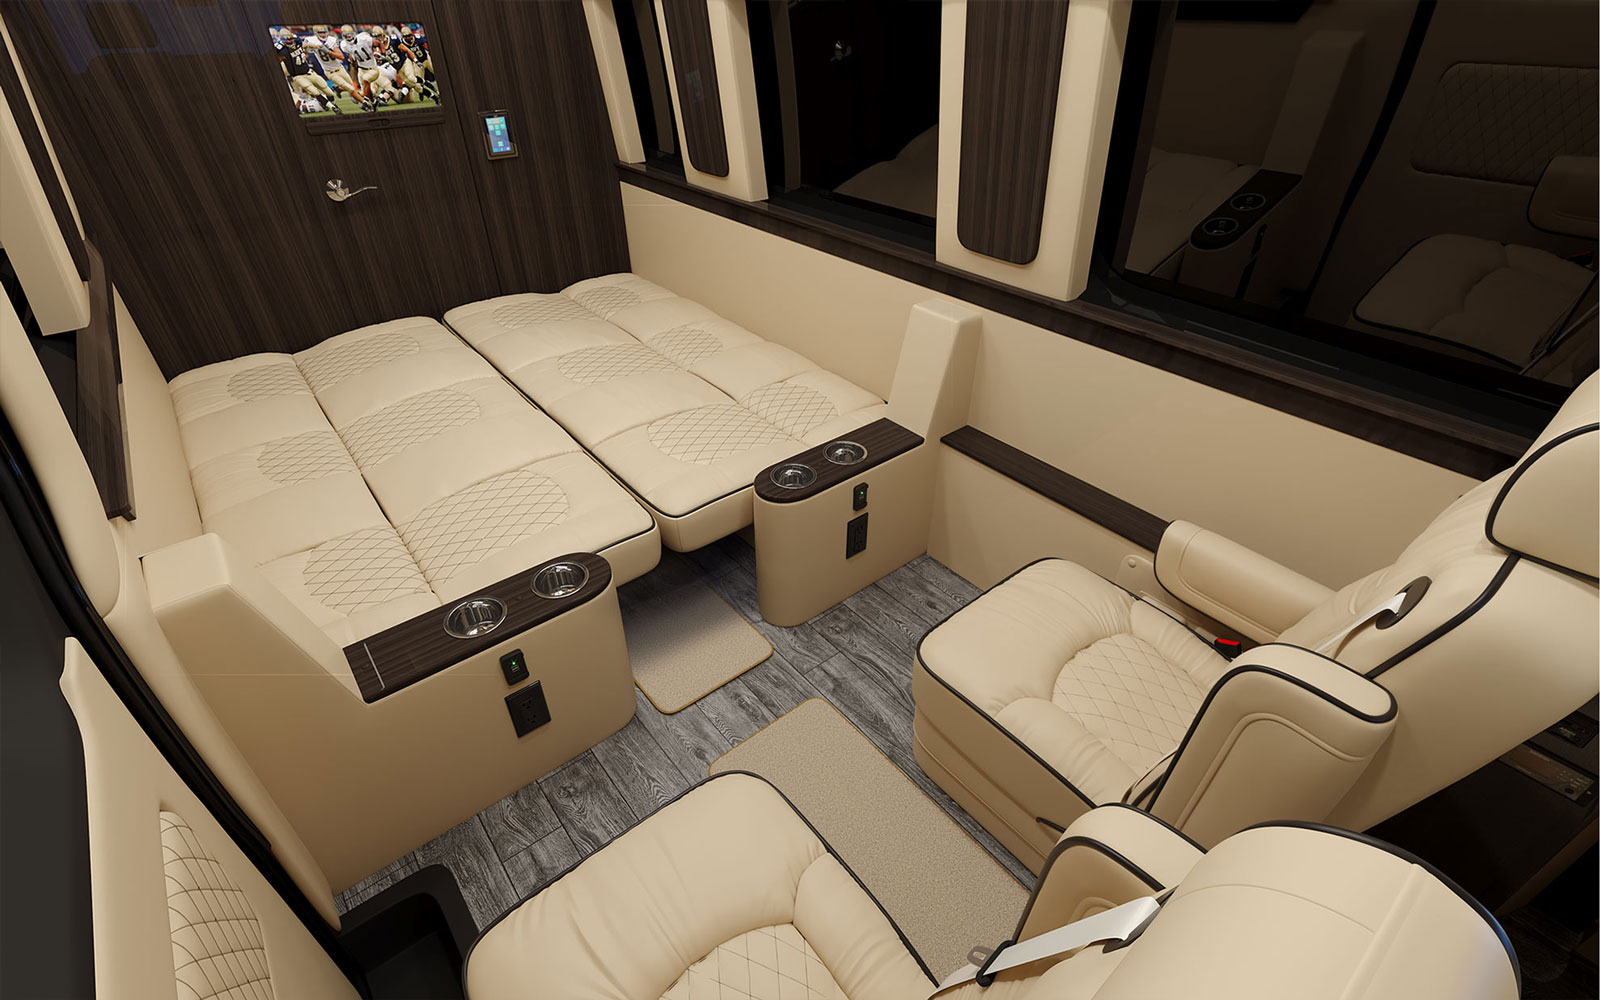 image showing the two sofas converted into a queen-sized bed in our luxury travel van